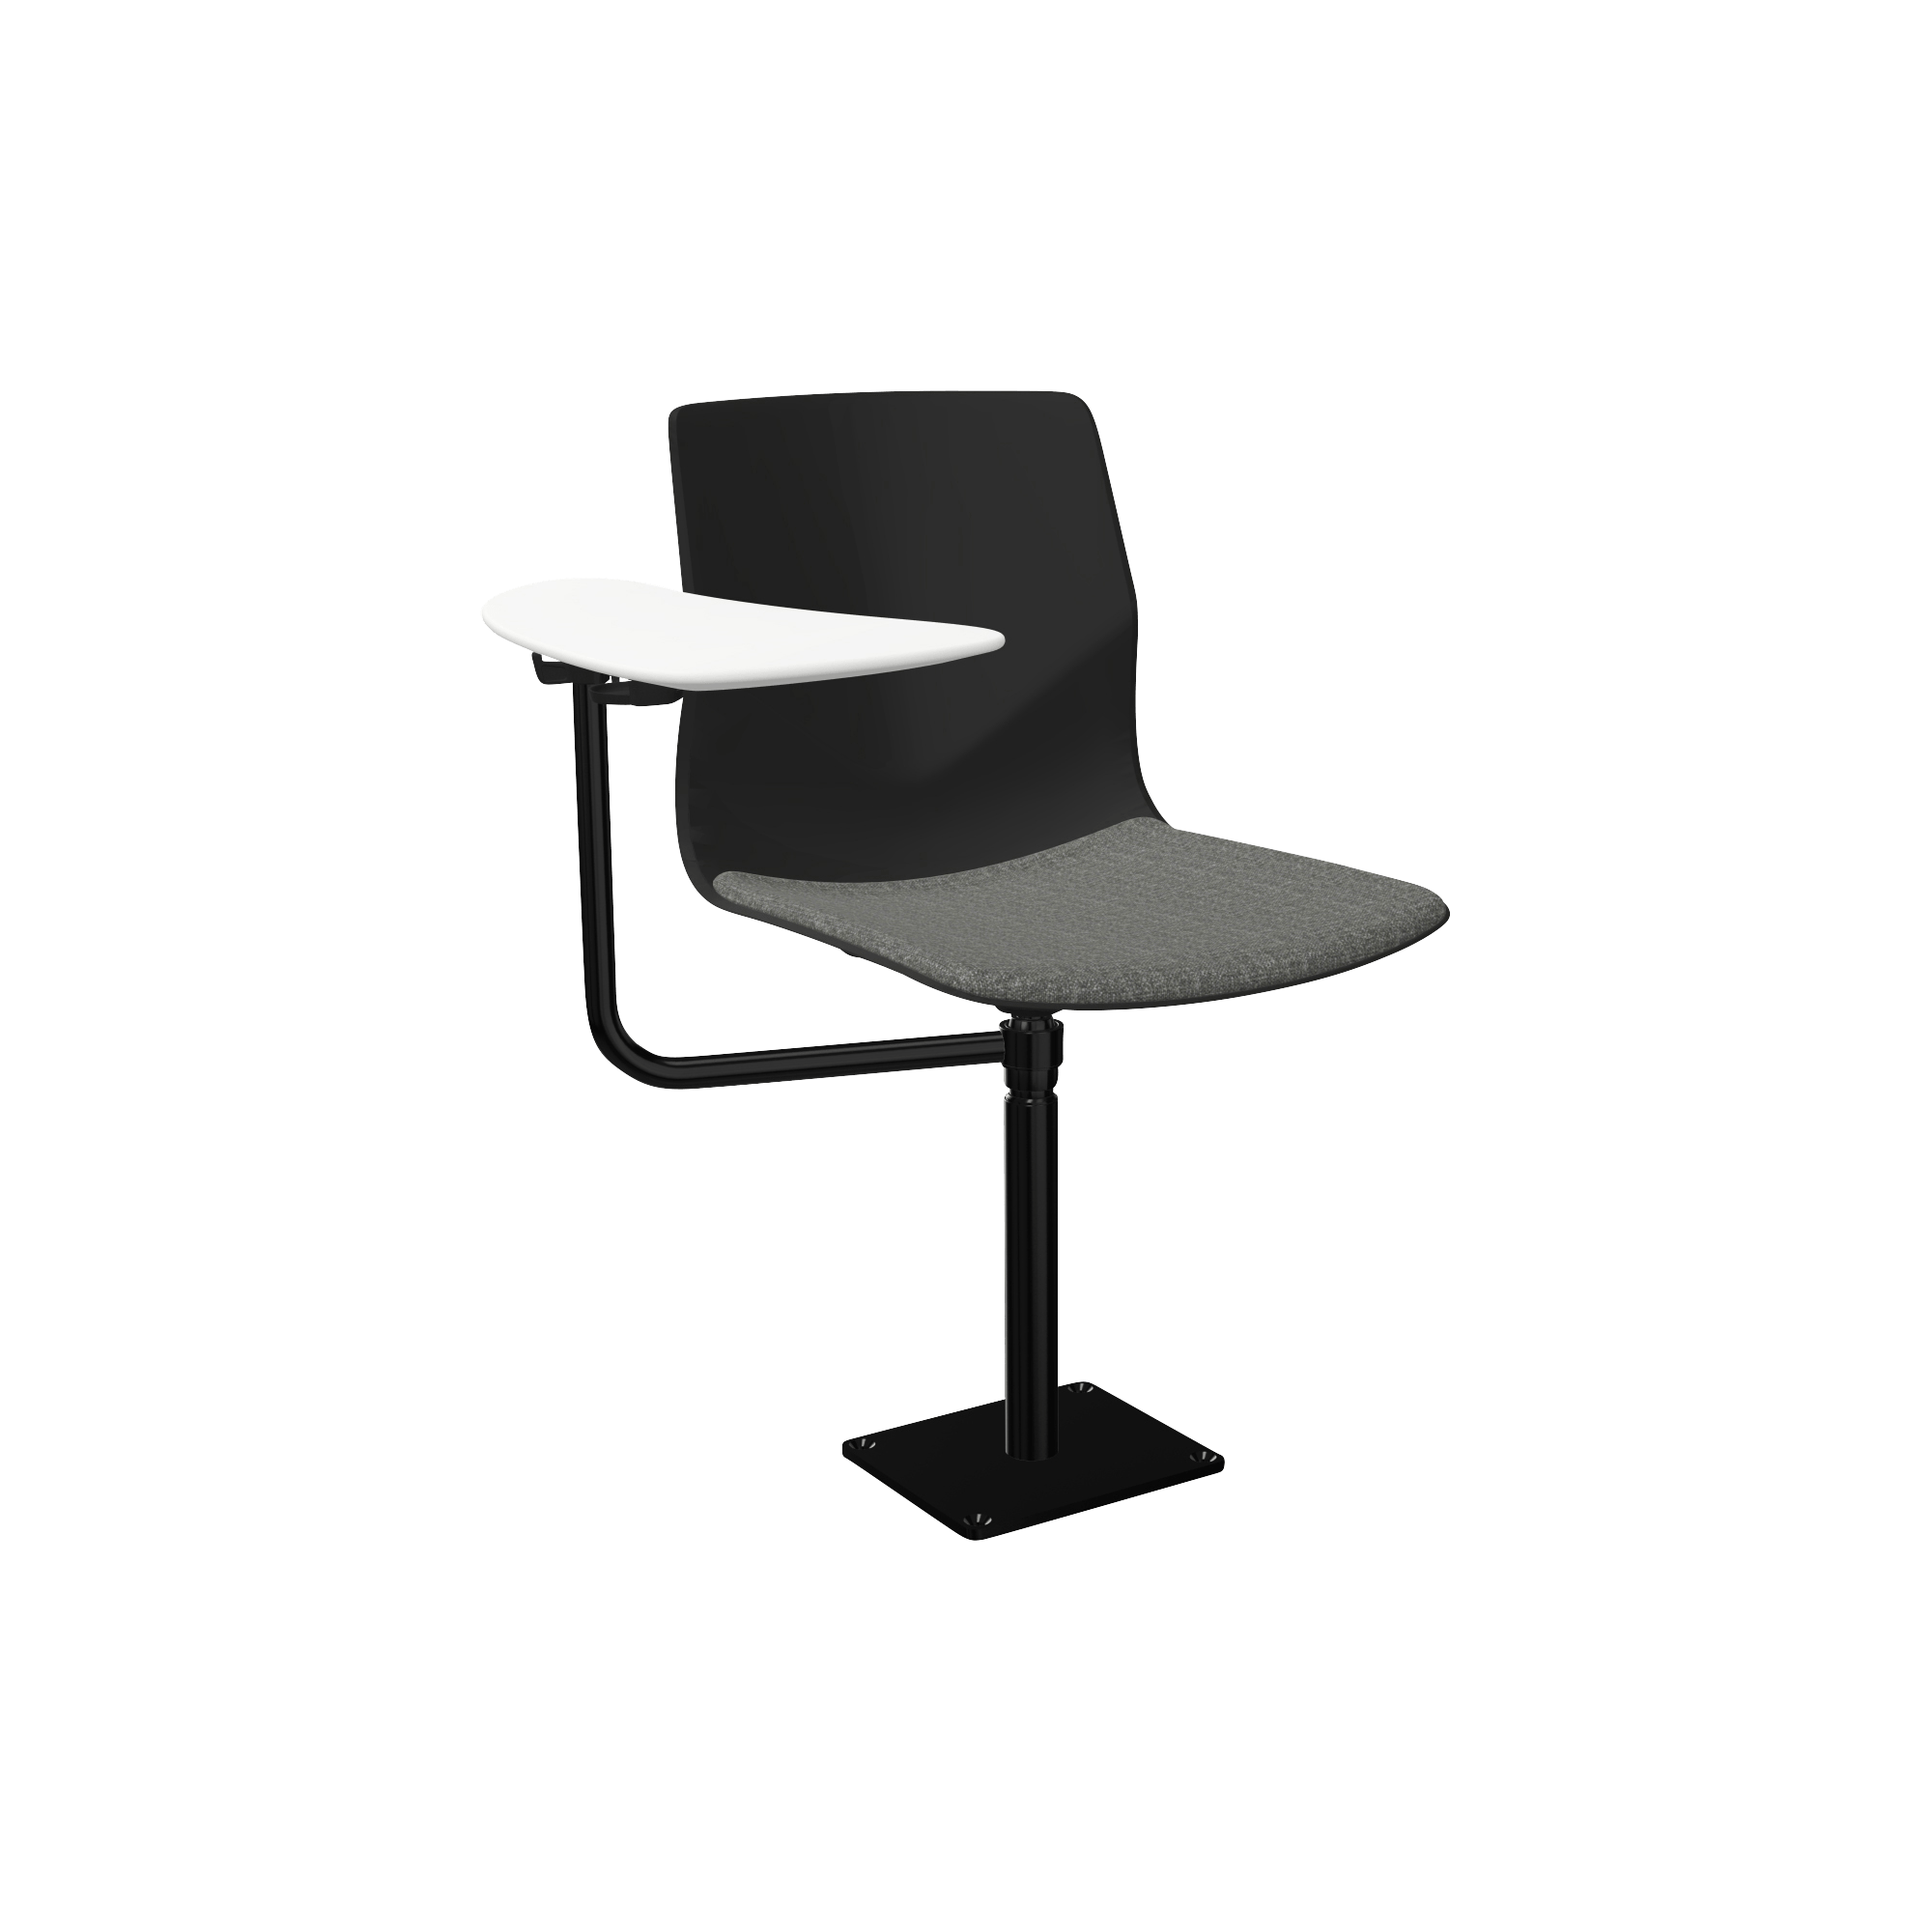 Black pedestal lecture chair with white work desk attached